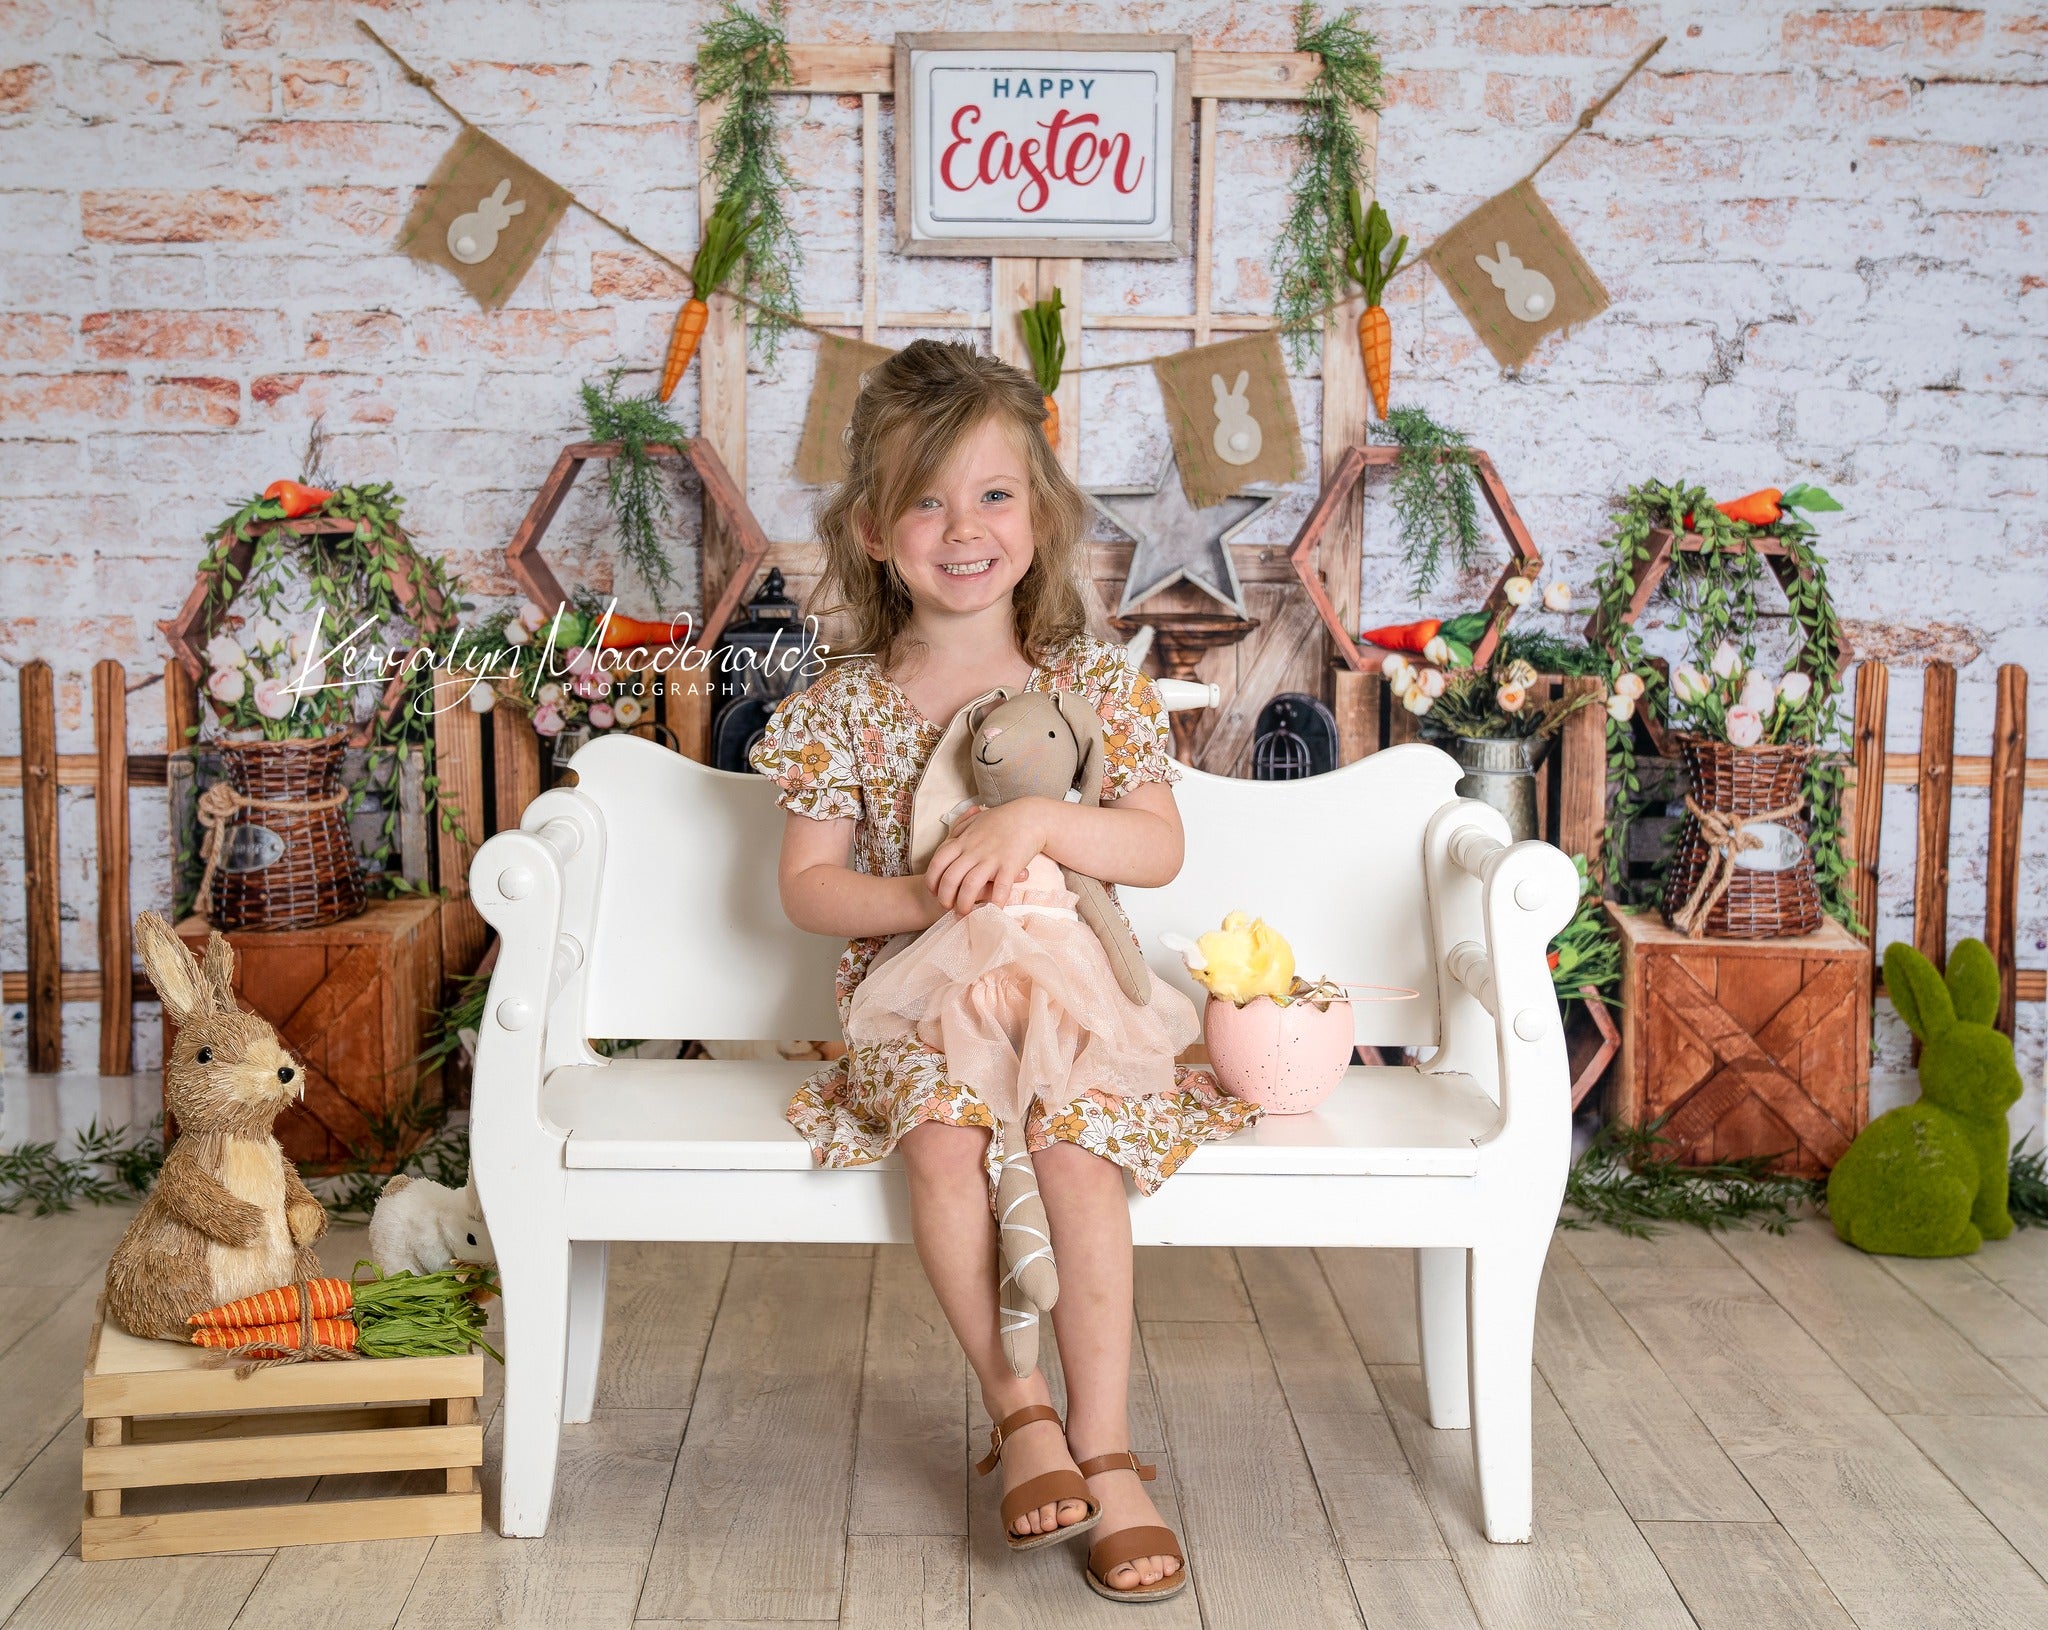 Kate Easter Bunny Brick Wall Backdrop for Photography